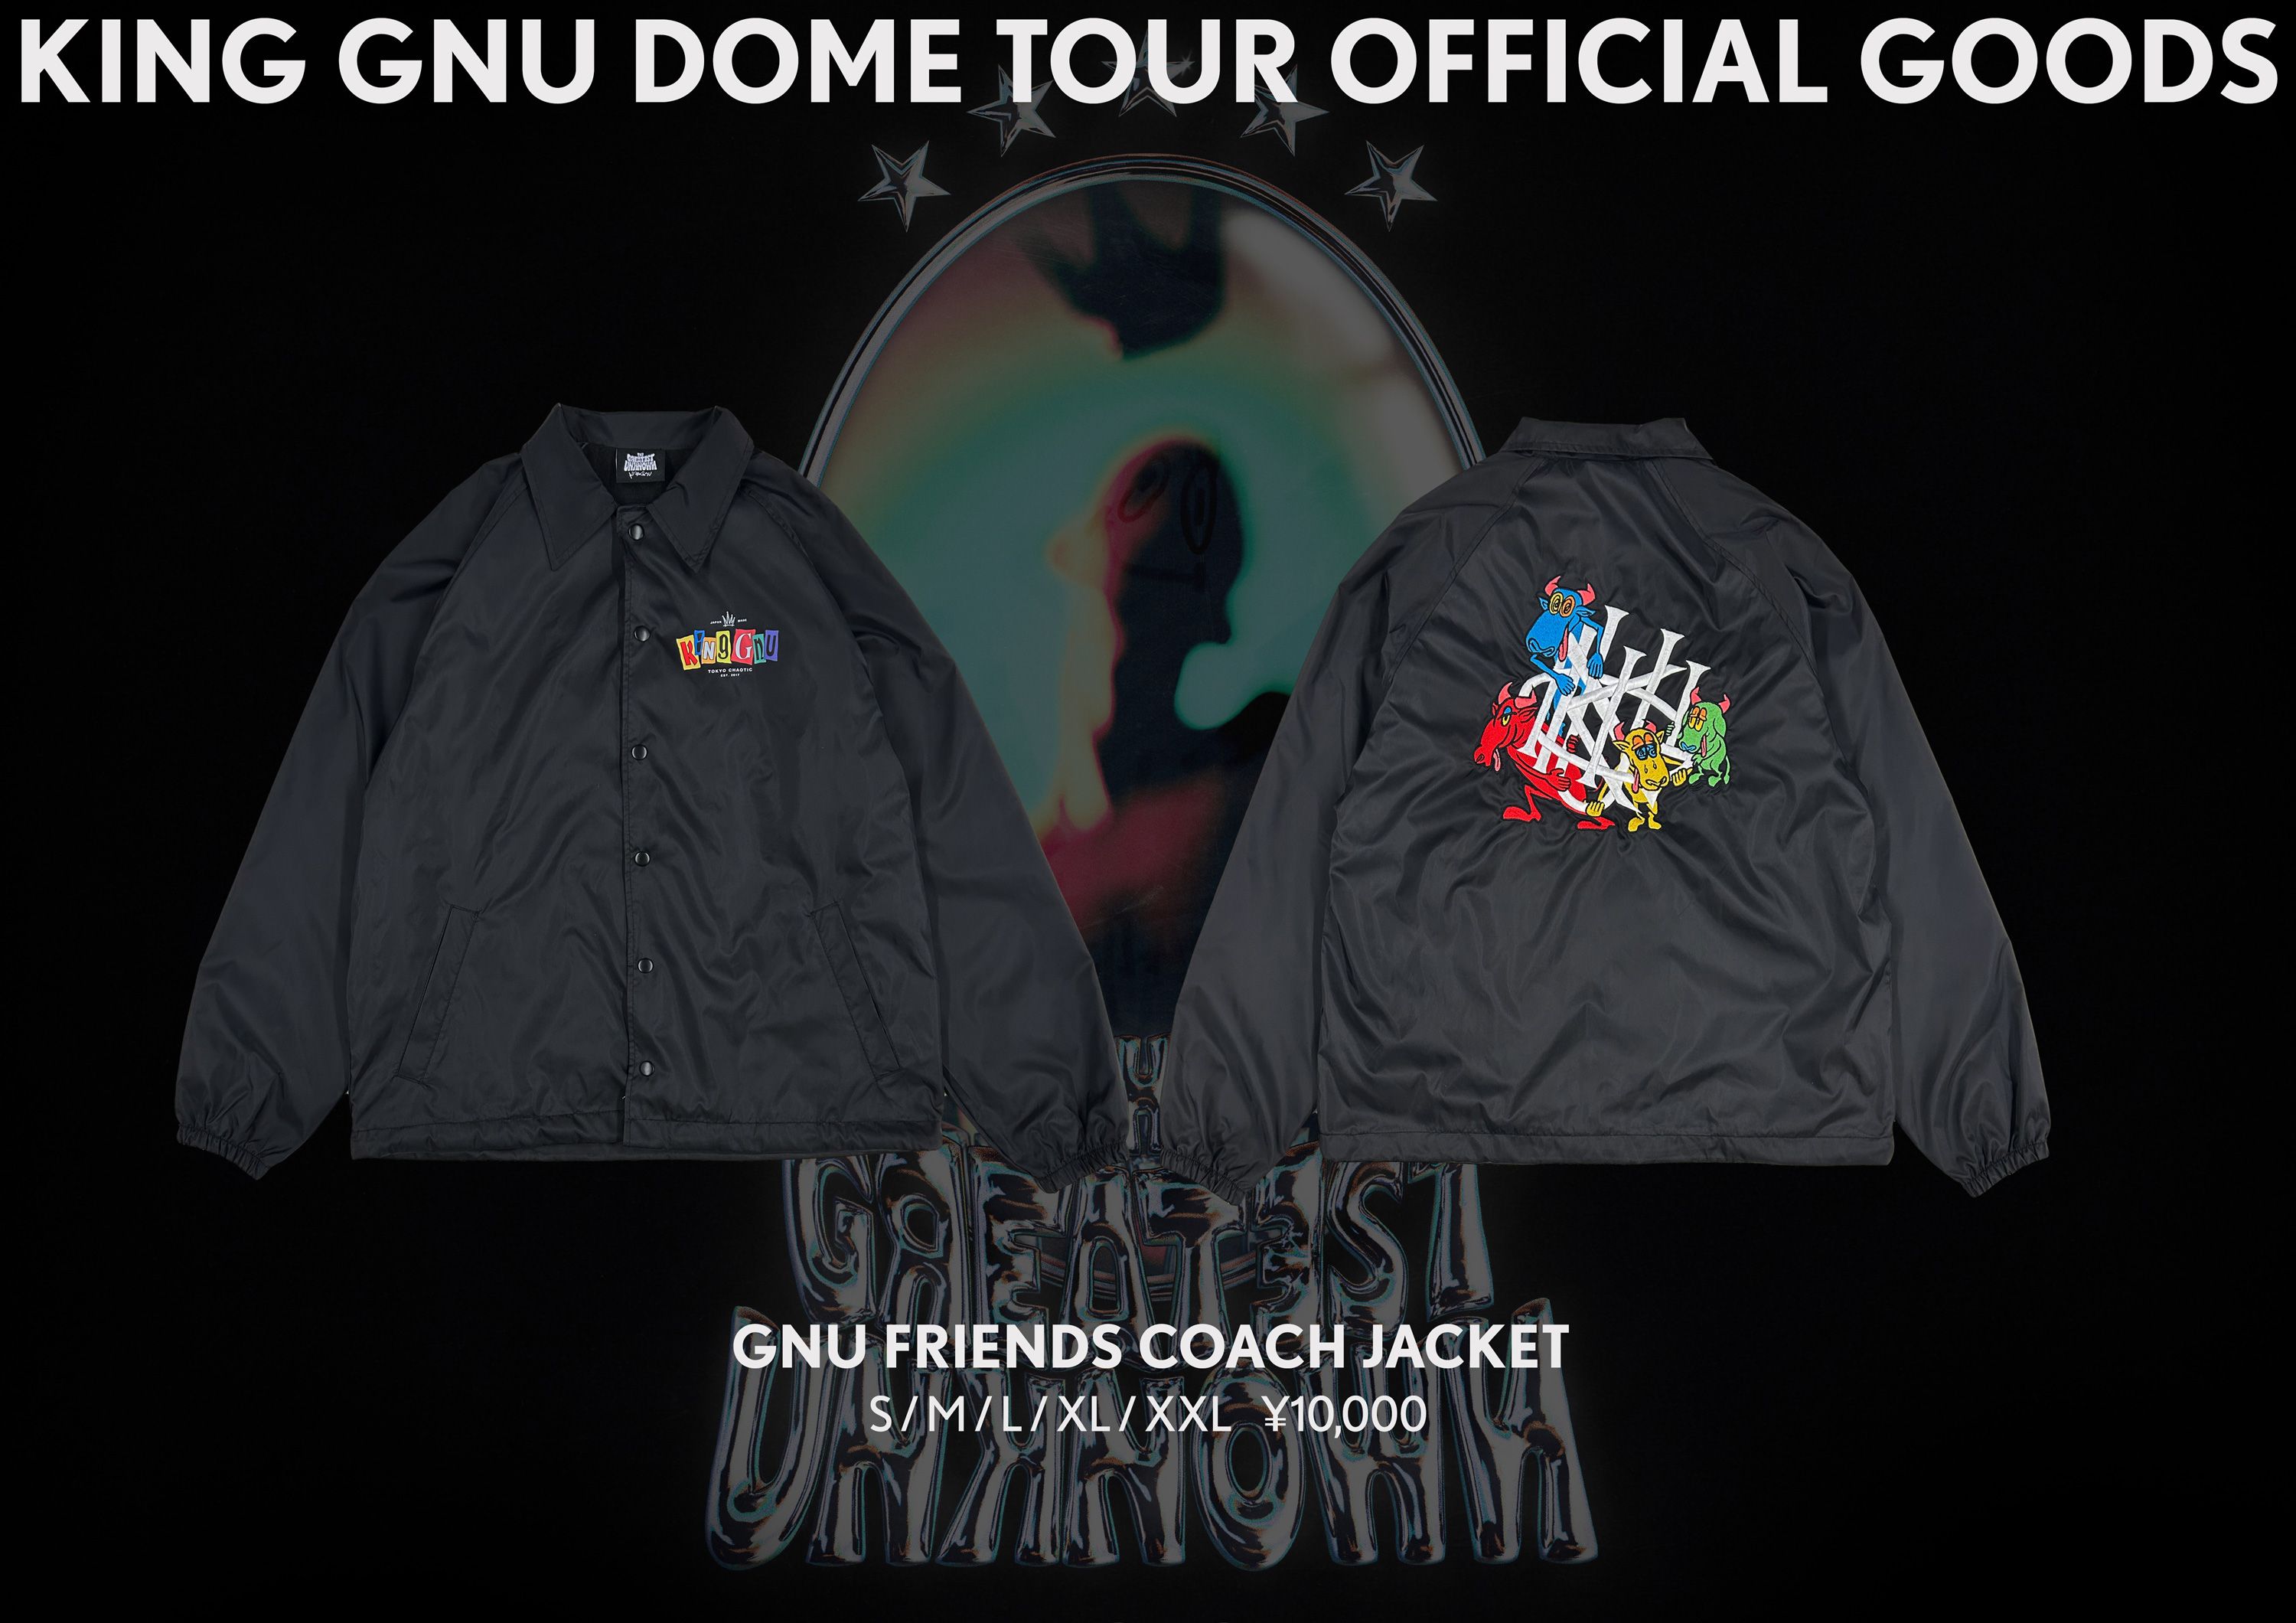 Goods】King Gnu Dome Tour「THE GREATEST UNKNOWN」第1弾オフィシャル 